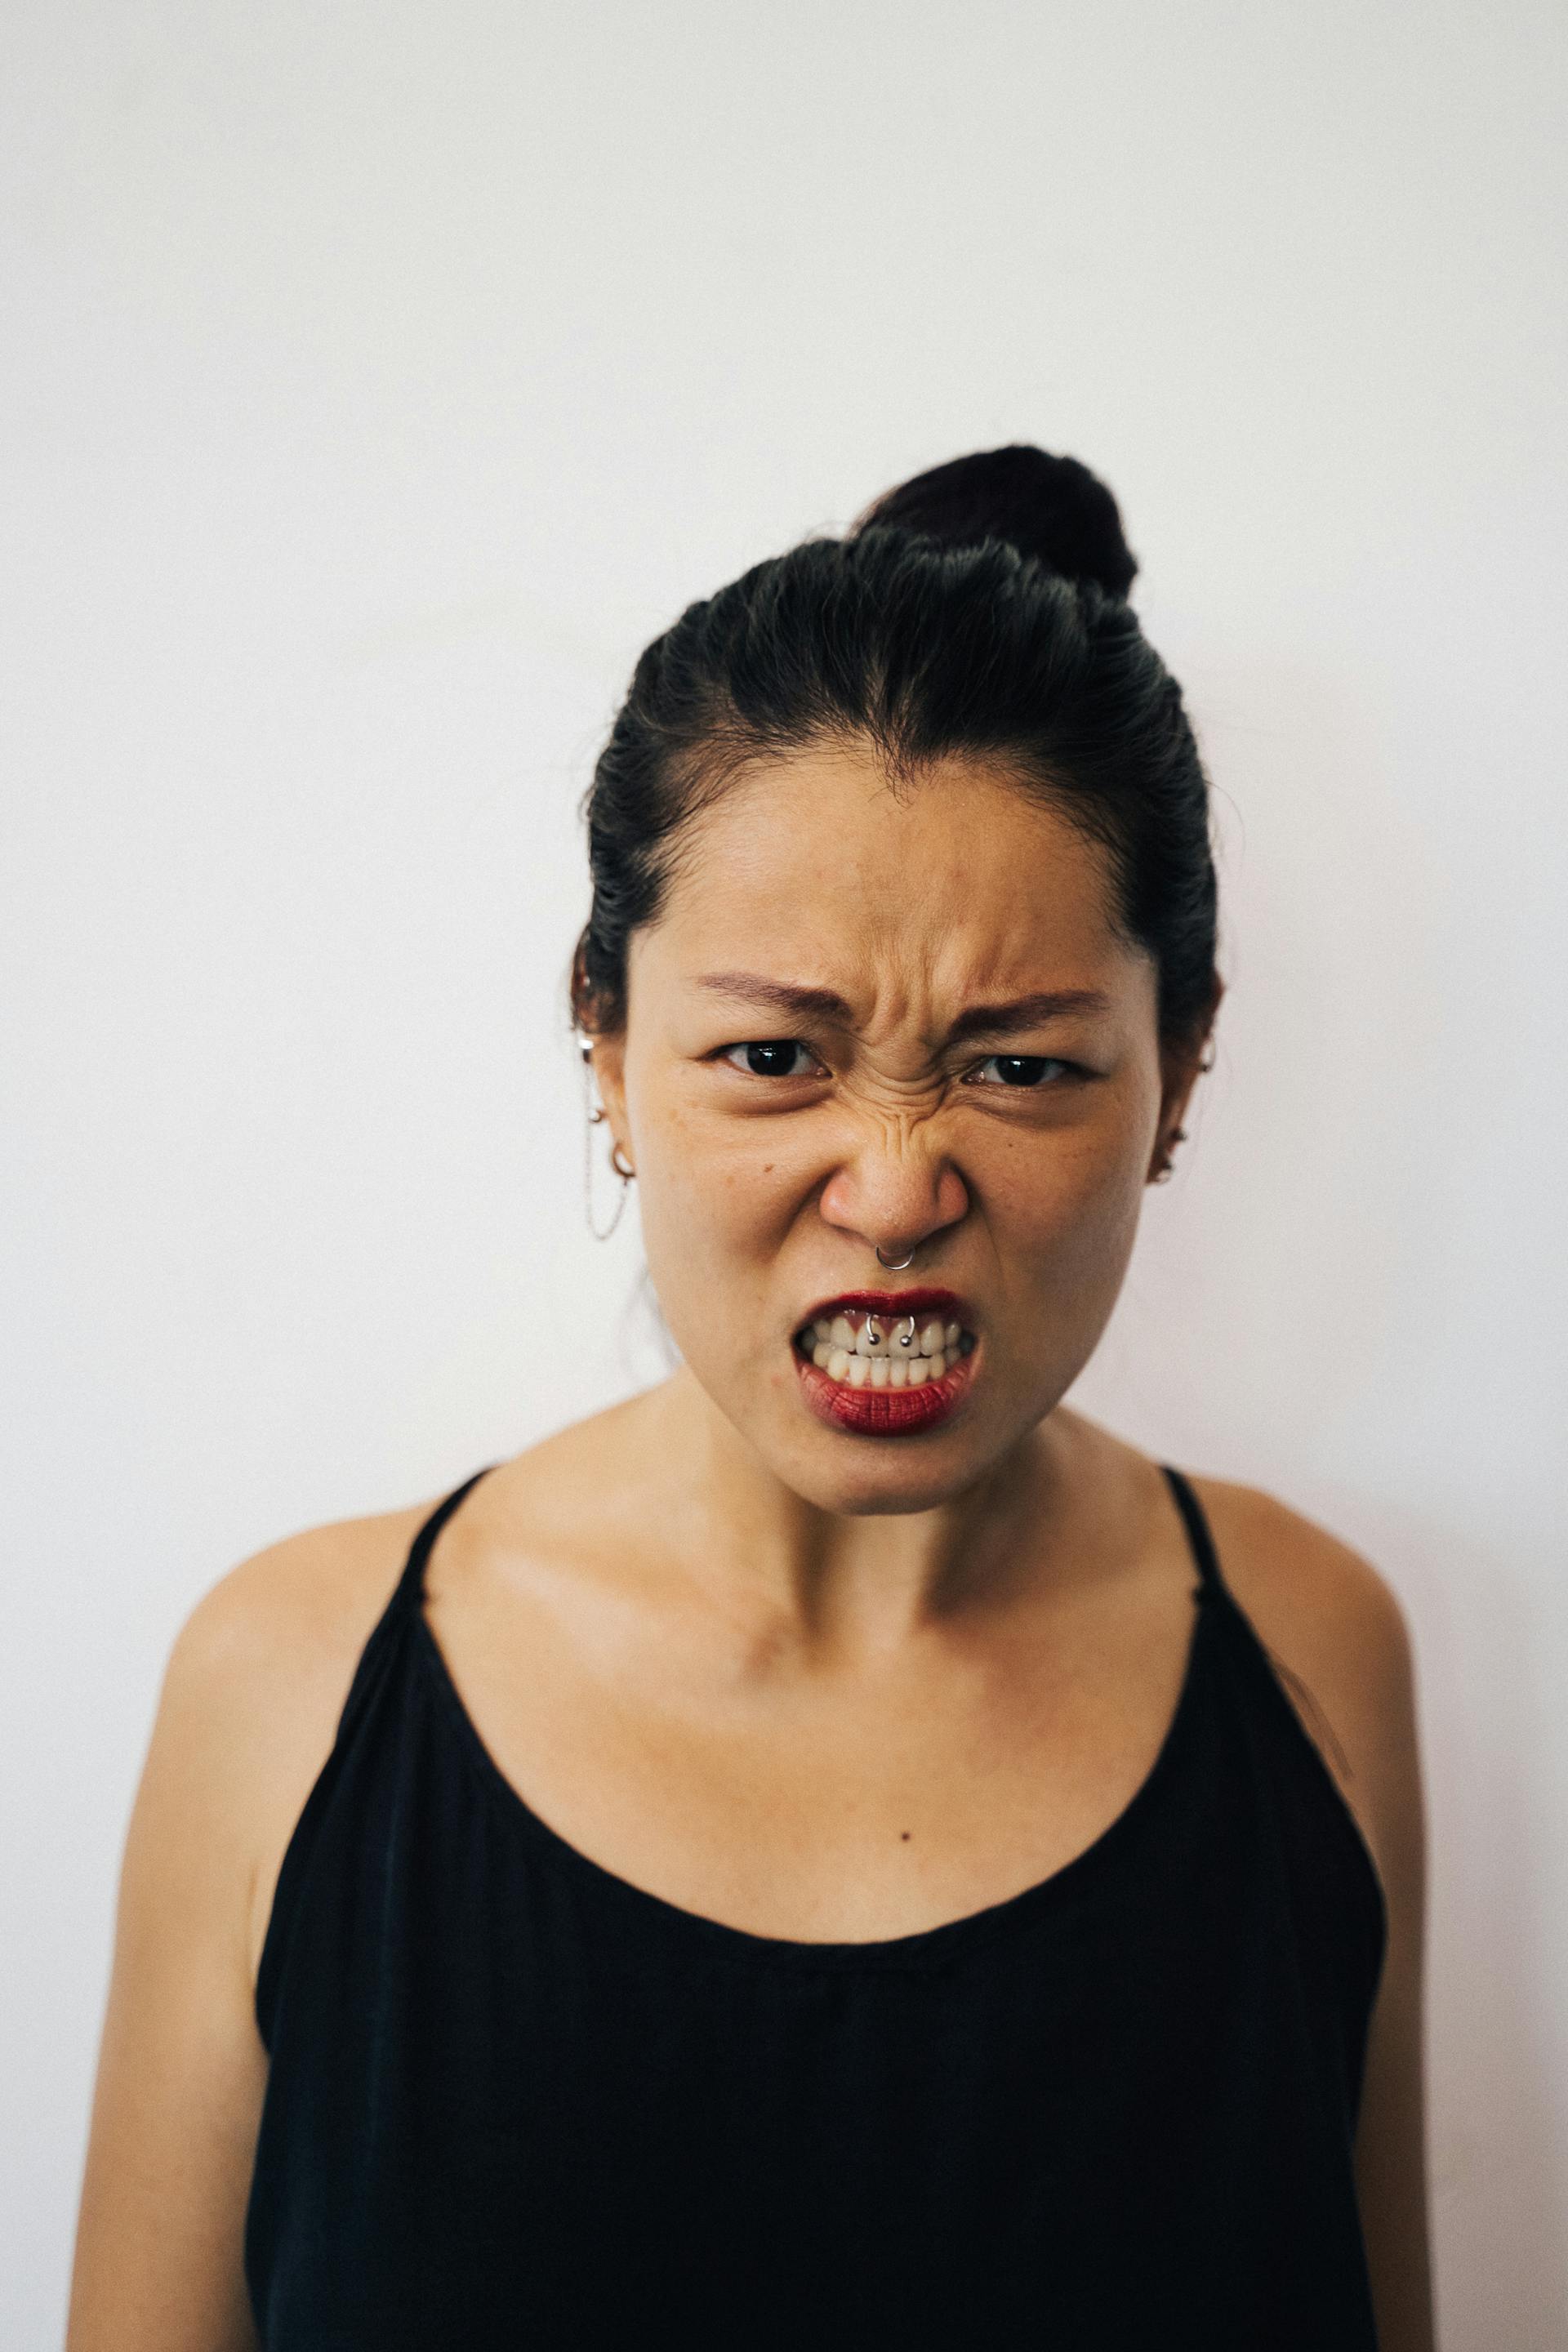 An angry woman | Source: Pexels